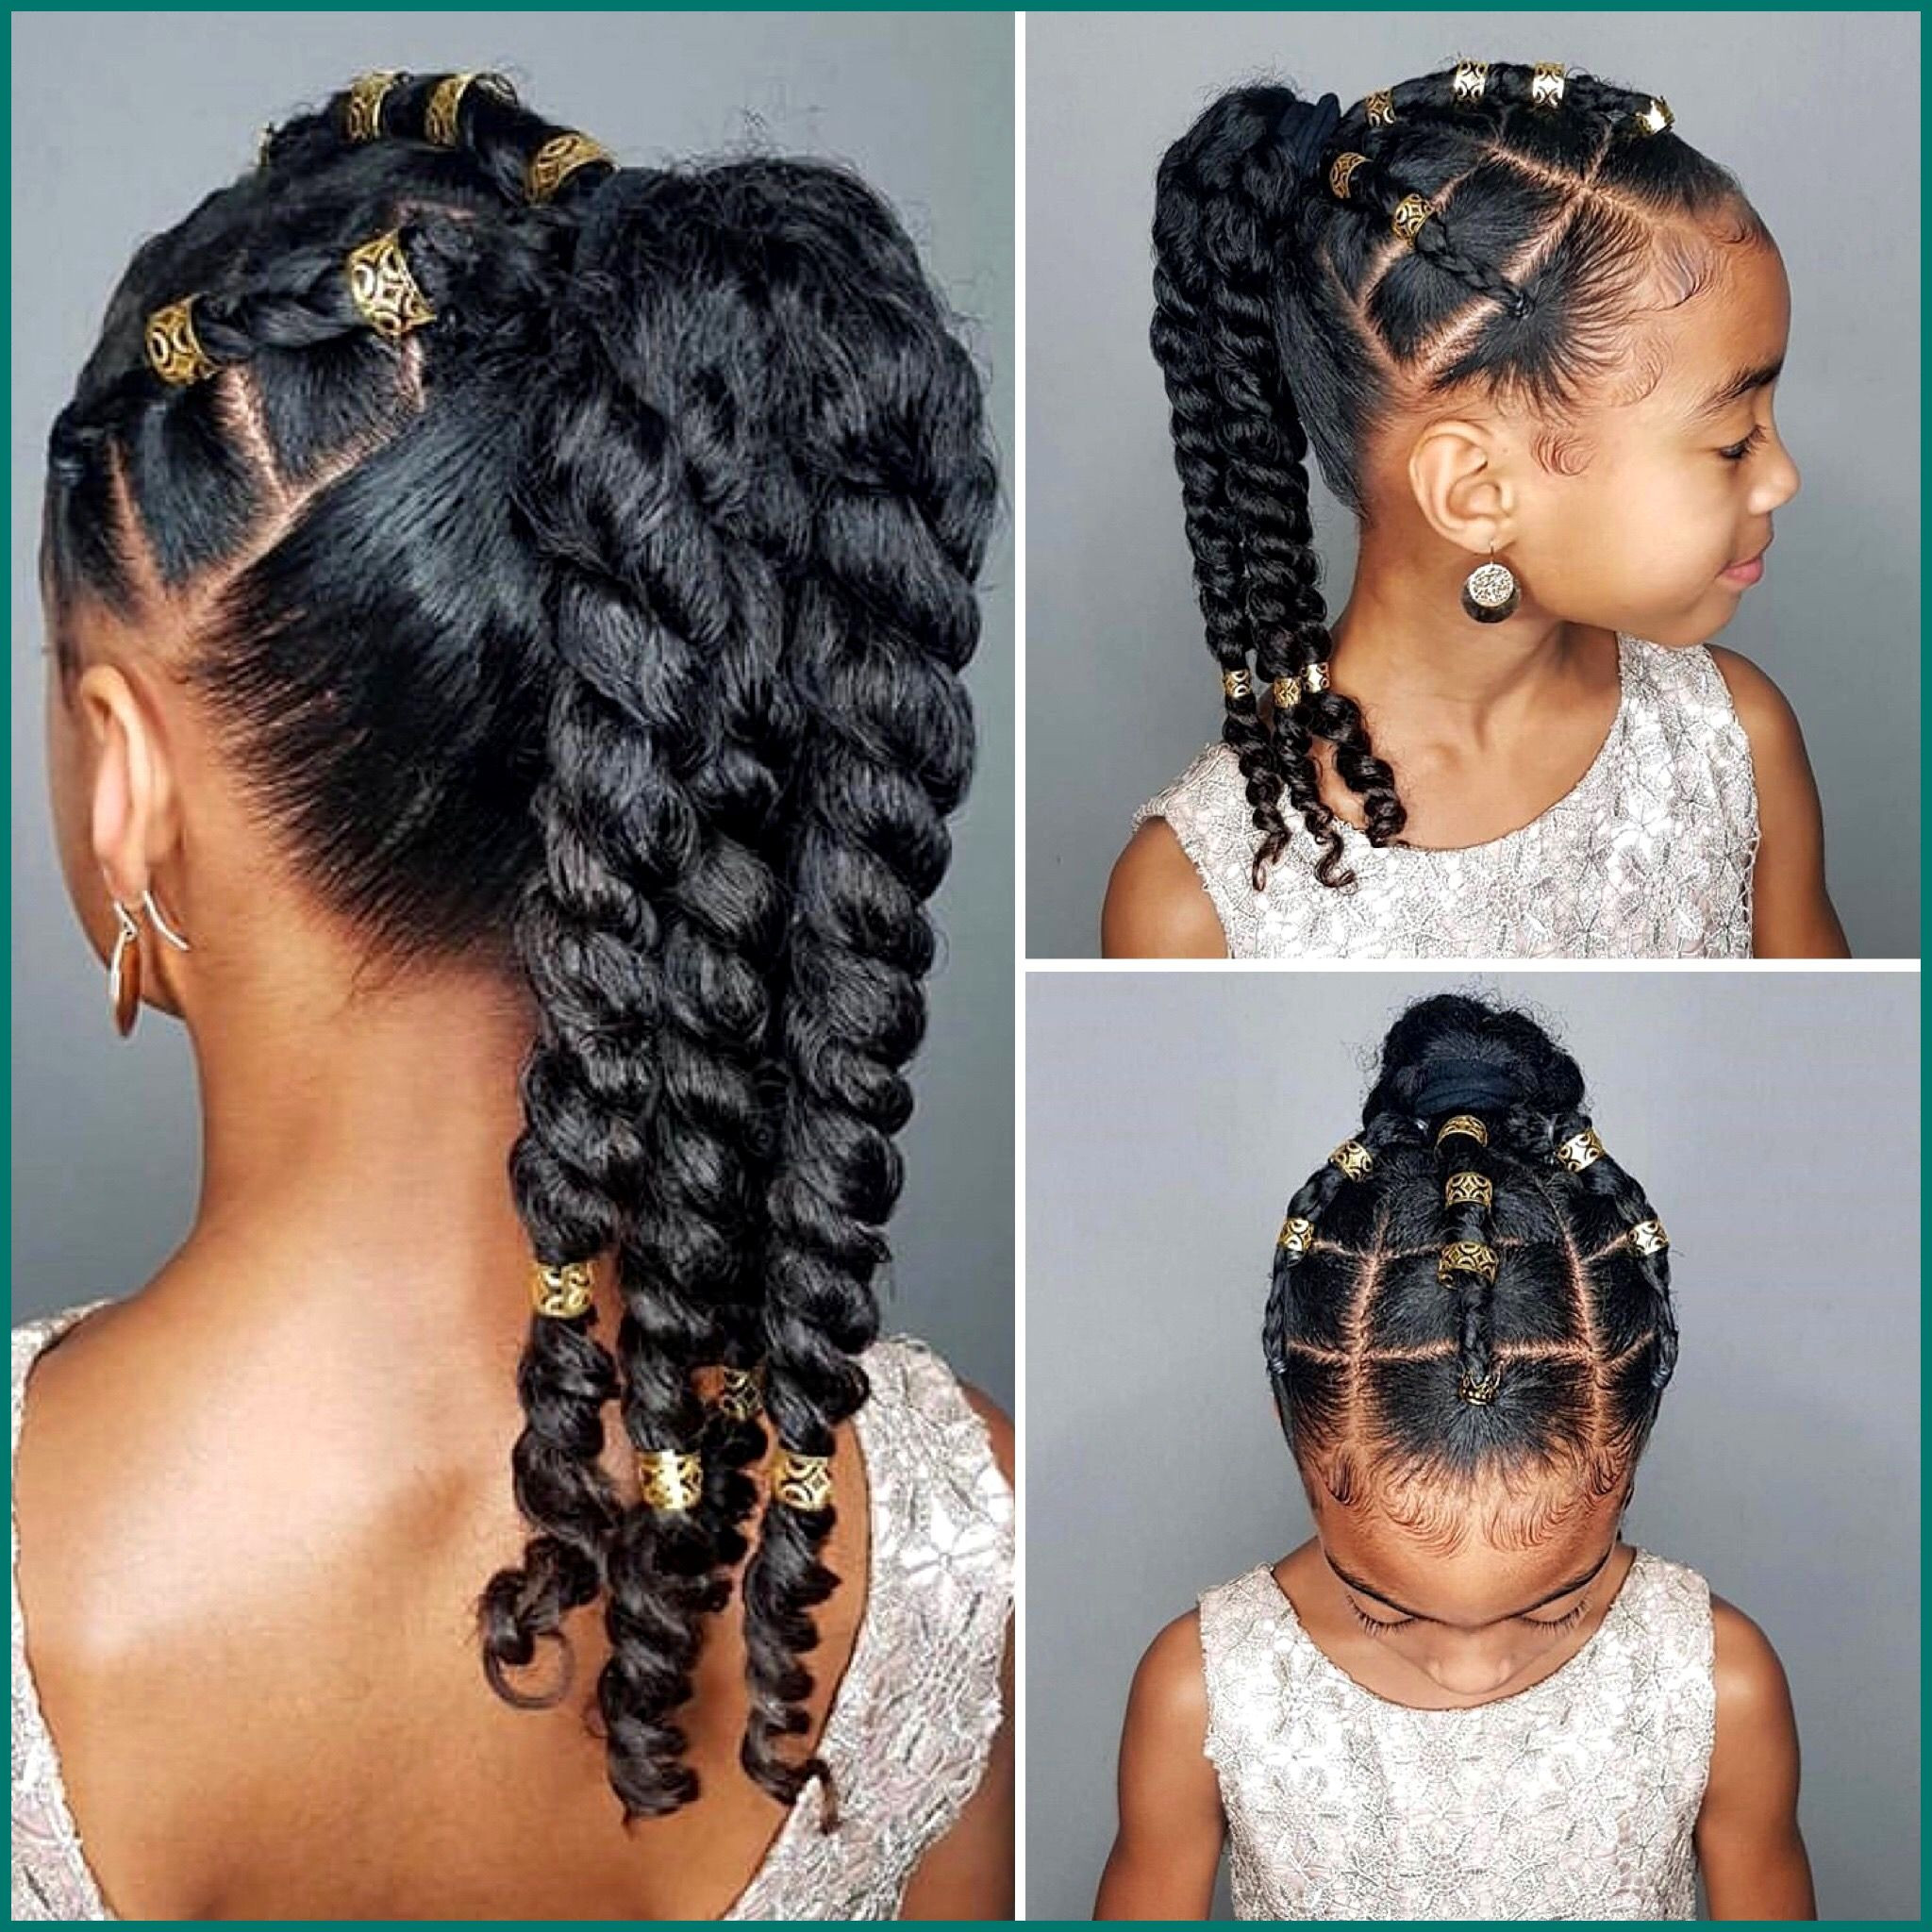 Little Black Kids Hairstyles
 Hairstyles For Little Kids Little Kids Hairstyle in 2020